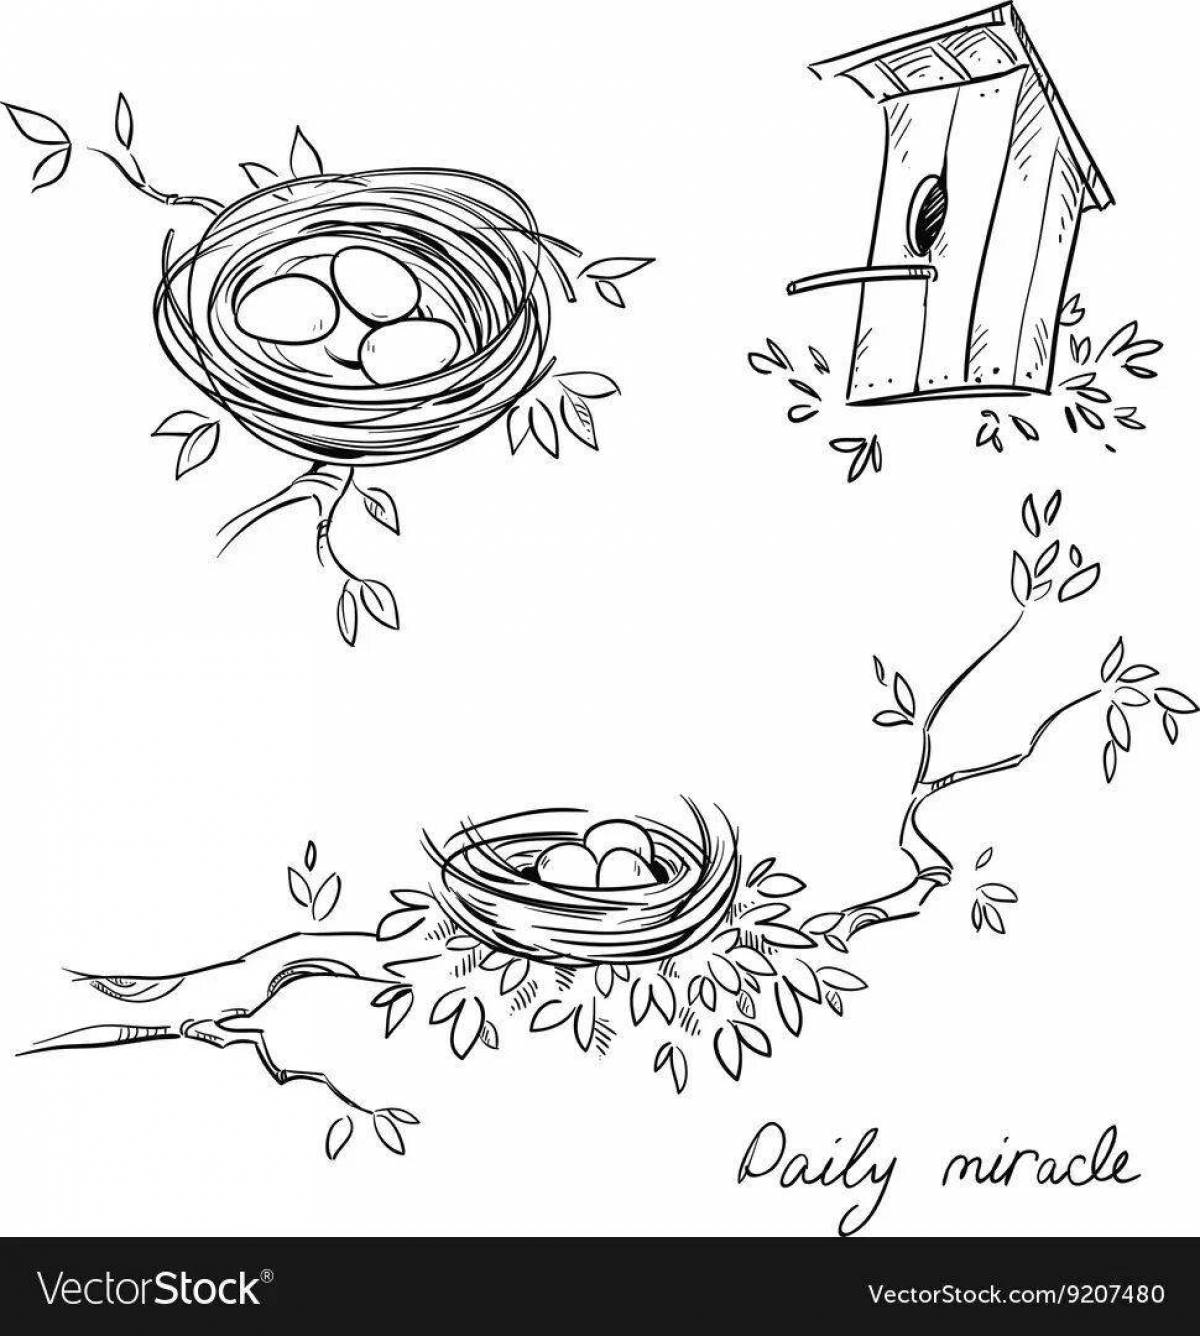 Color-frenzy nest coloring page for juniors